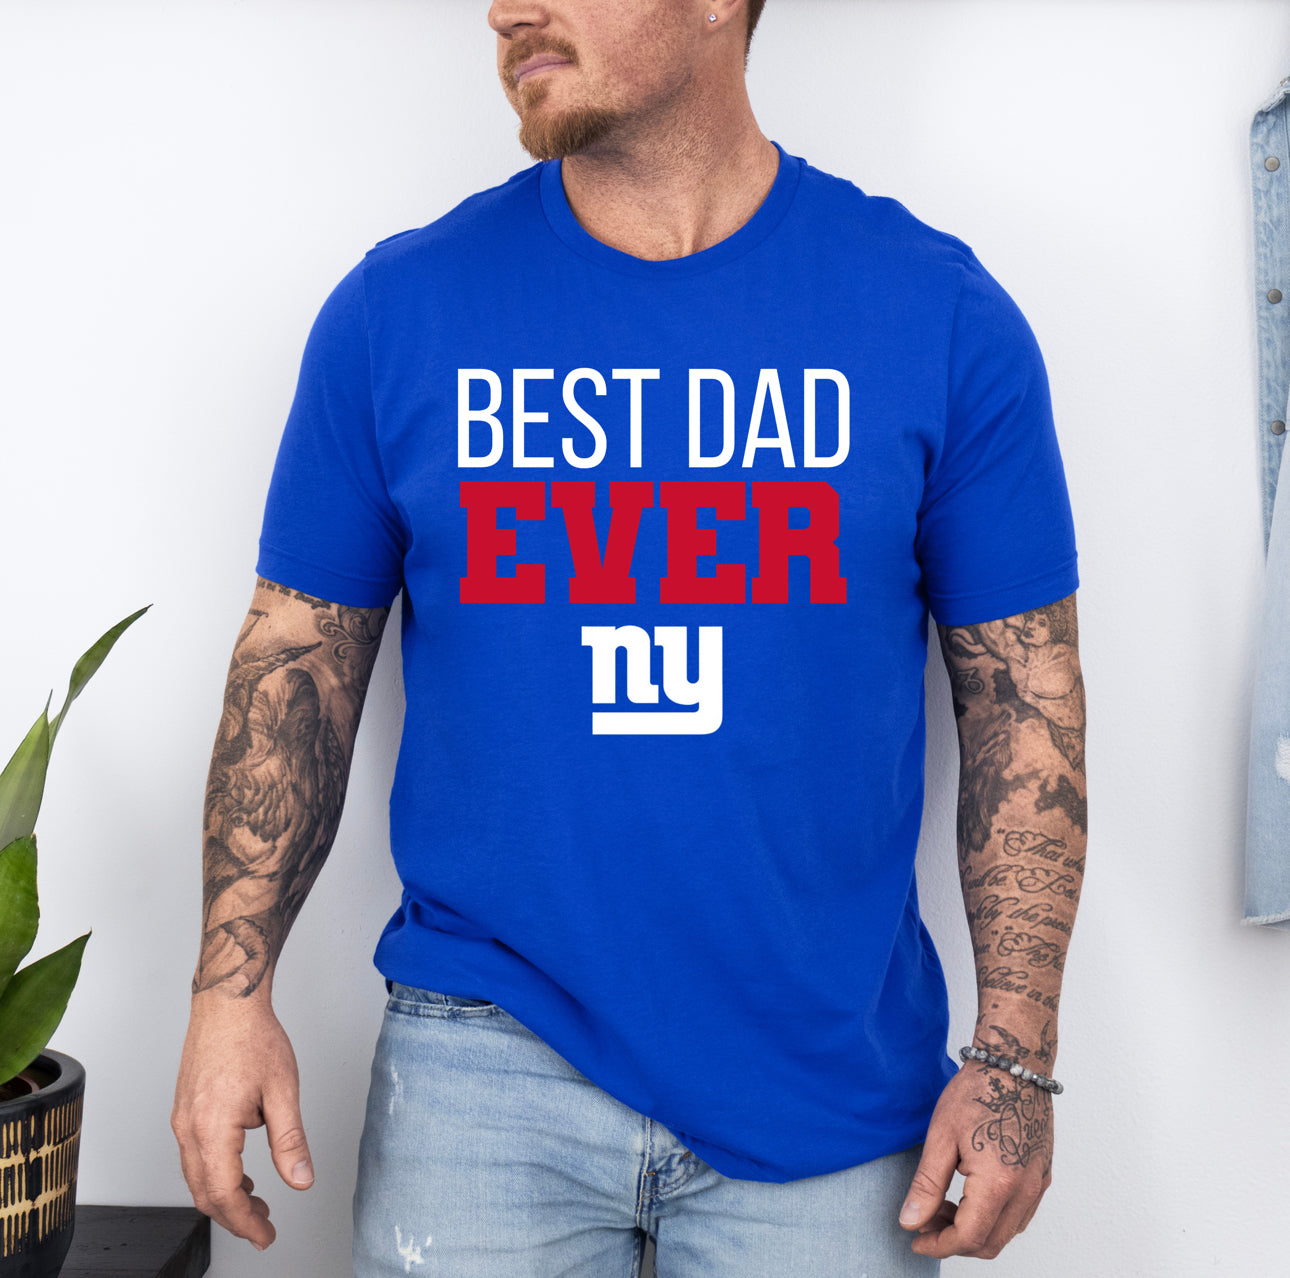 Best Dad Ever Sports Logo Theme T-Shirts, Best Dad Ever T-Shirt, Father’s Day T-Shirt, Best Dad Ever NY Giants T-Shirt